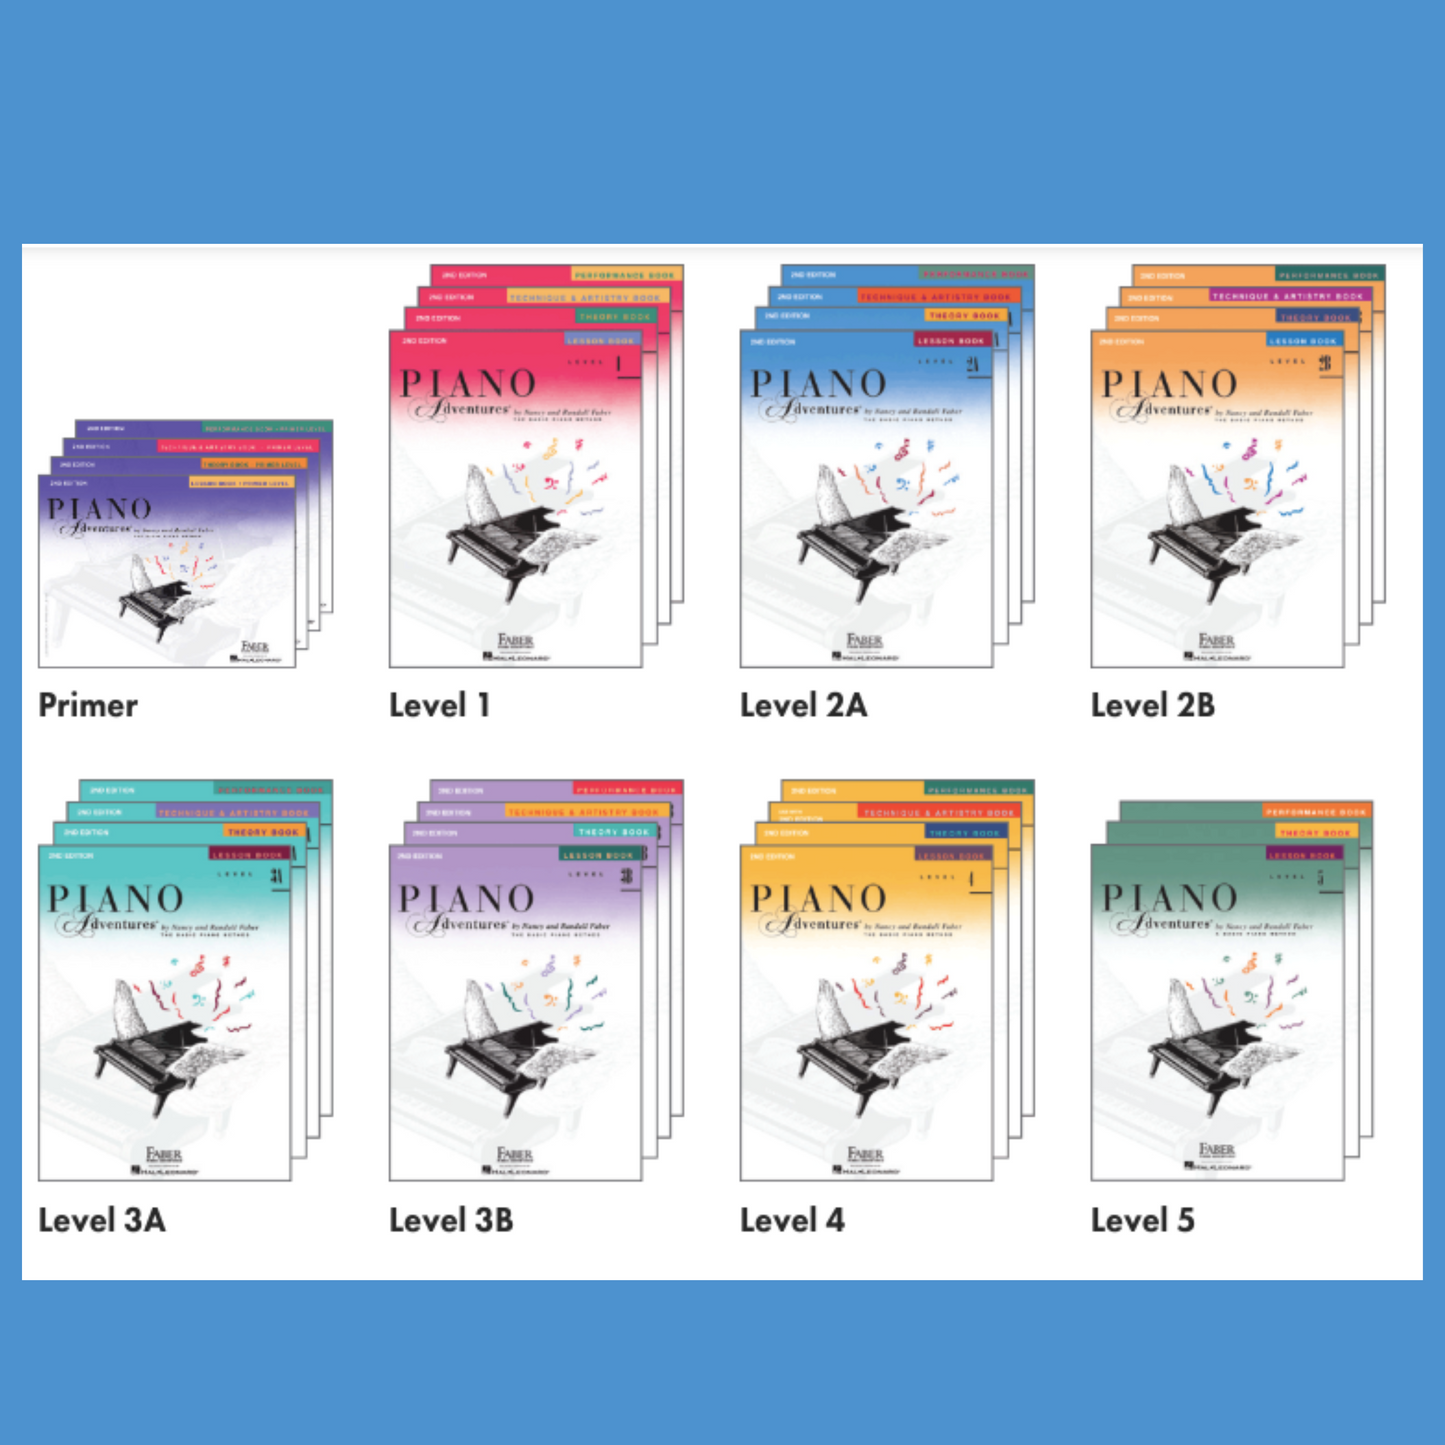 Piano Adventures: Lesson Level 2B Book (2nd Edition)